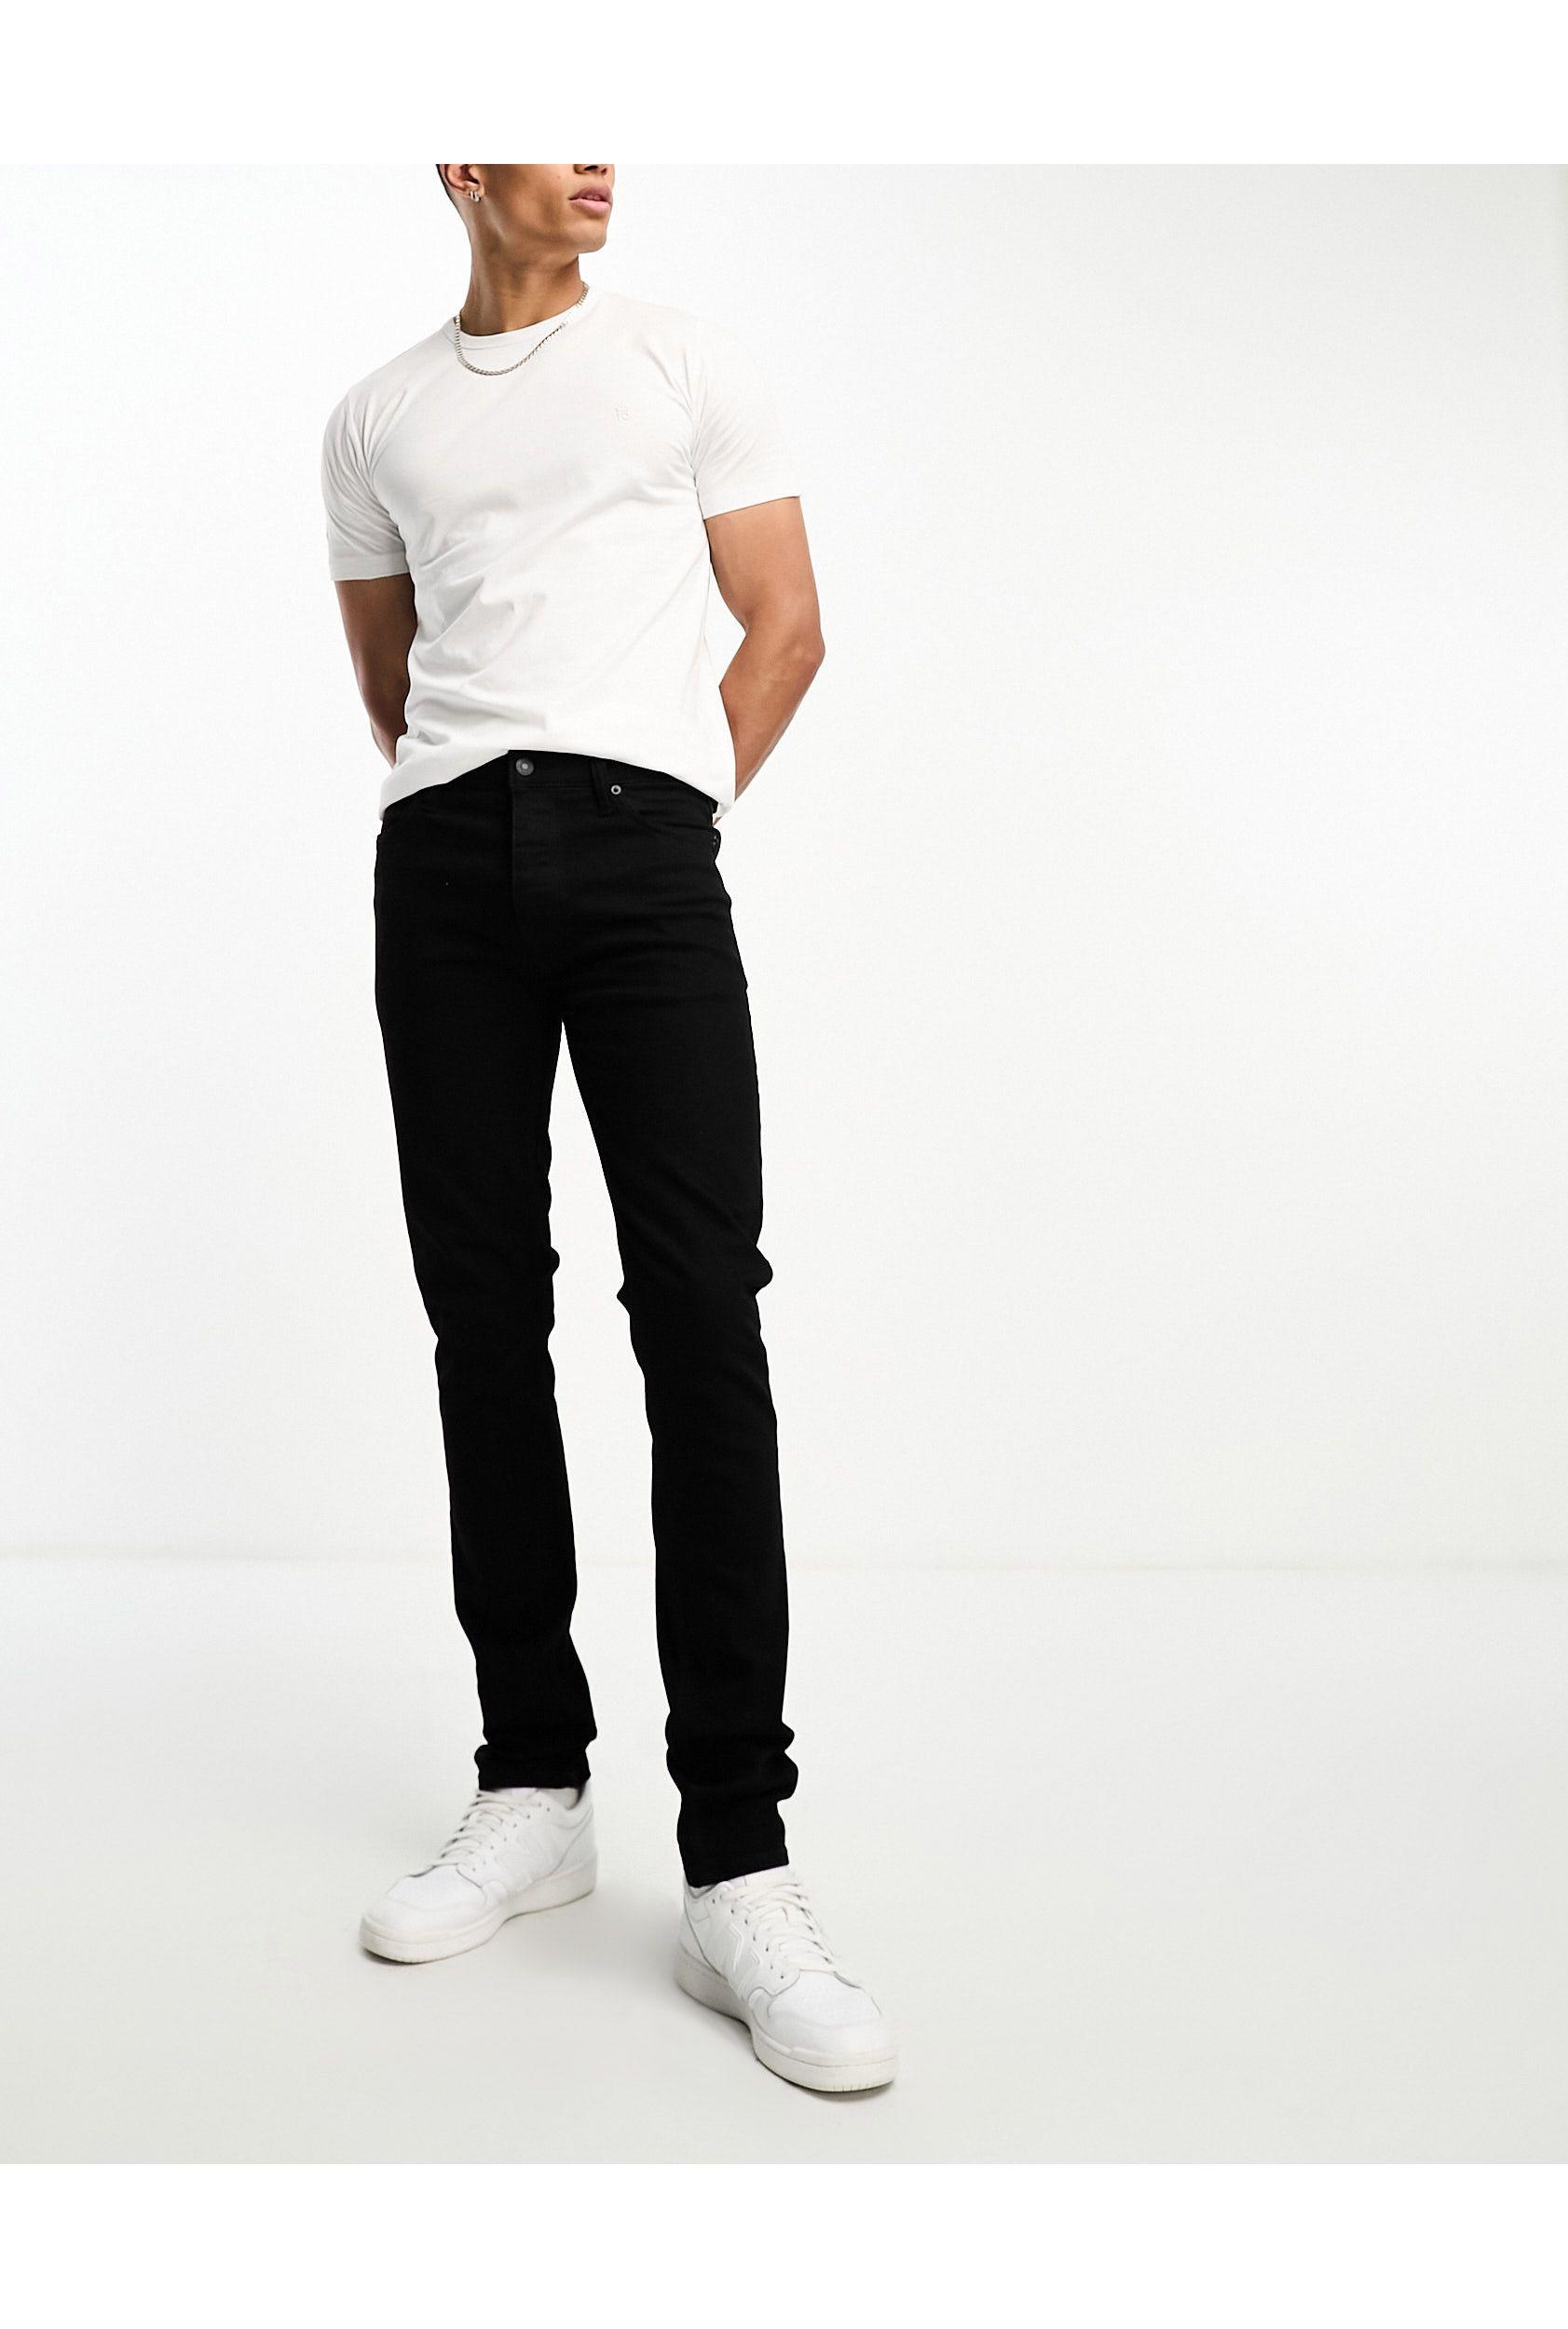 French Connection Tall Slim Fit Jeans in Black for Men | Lyst